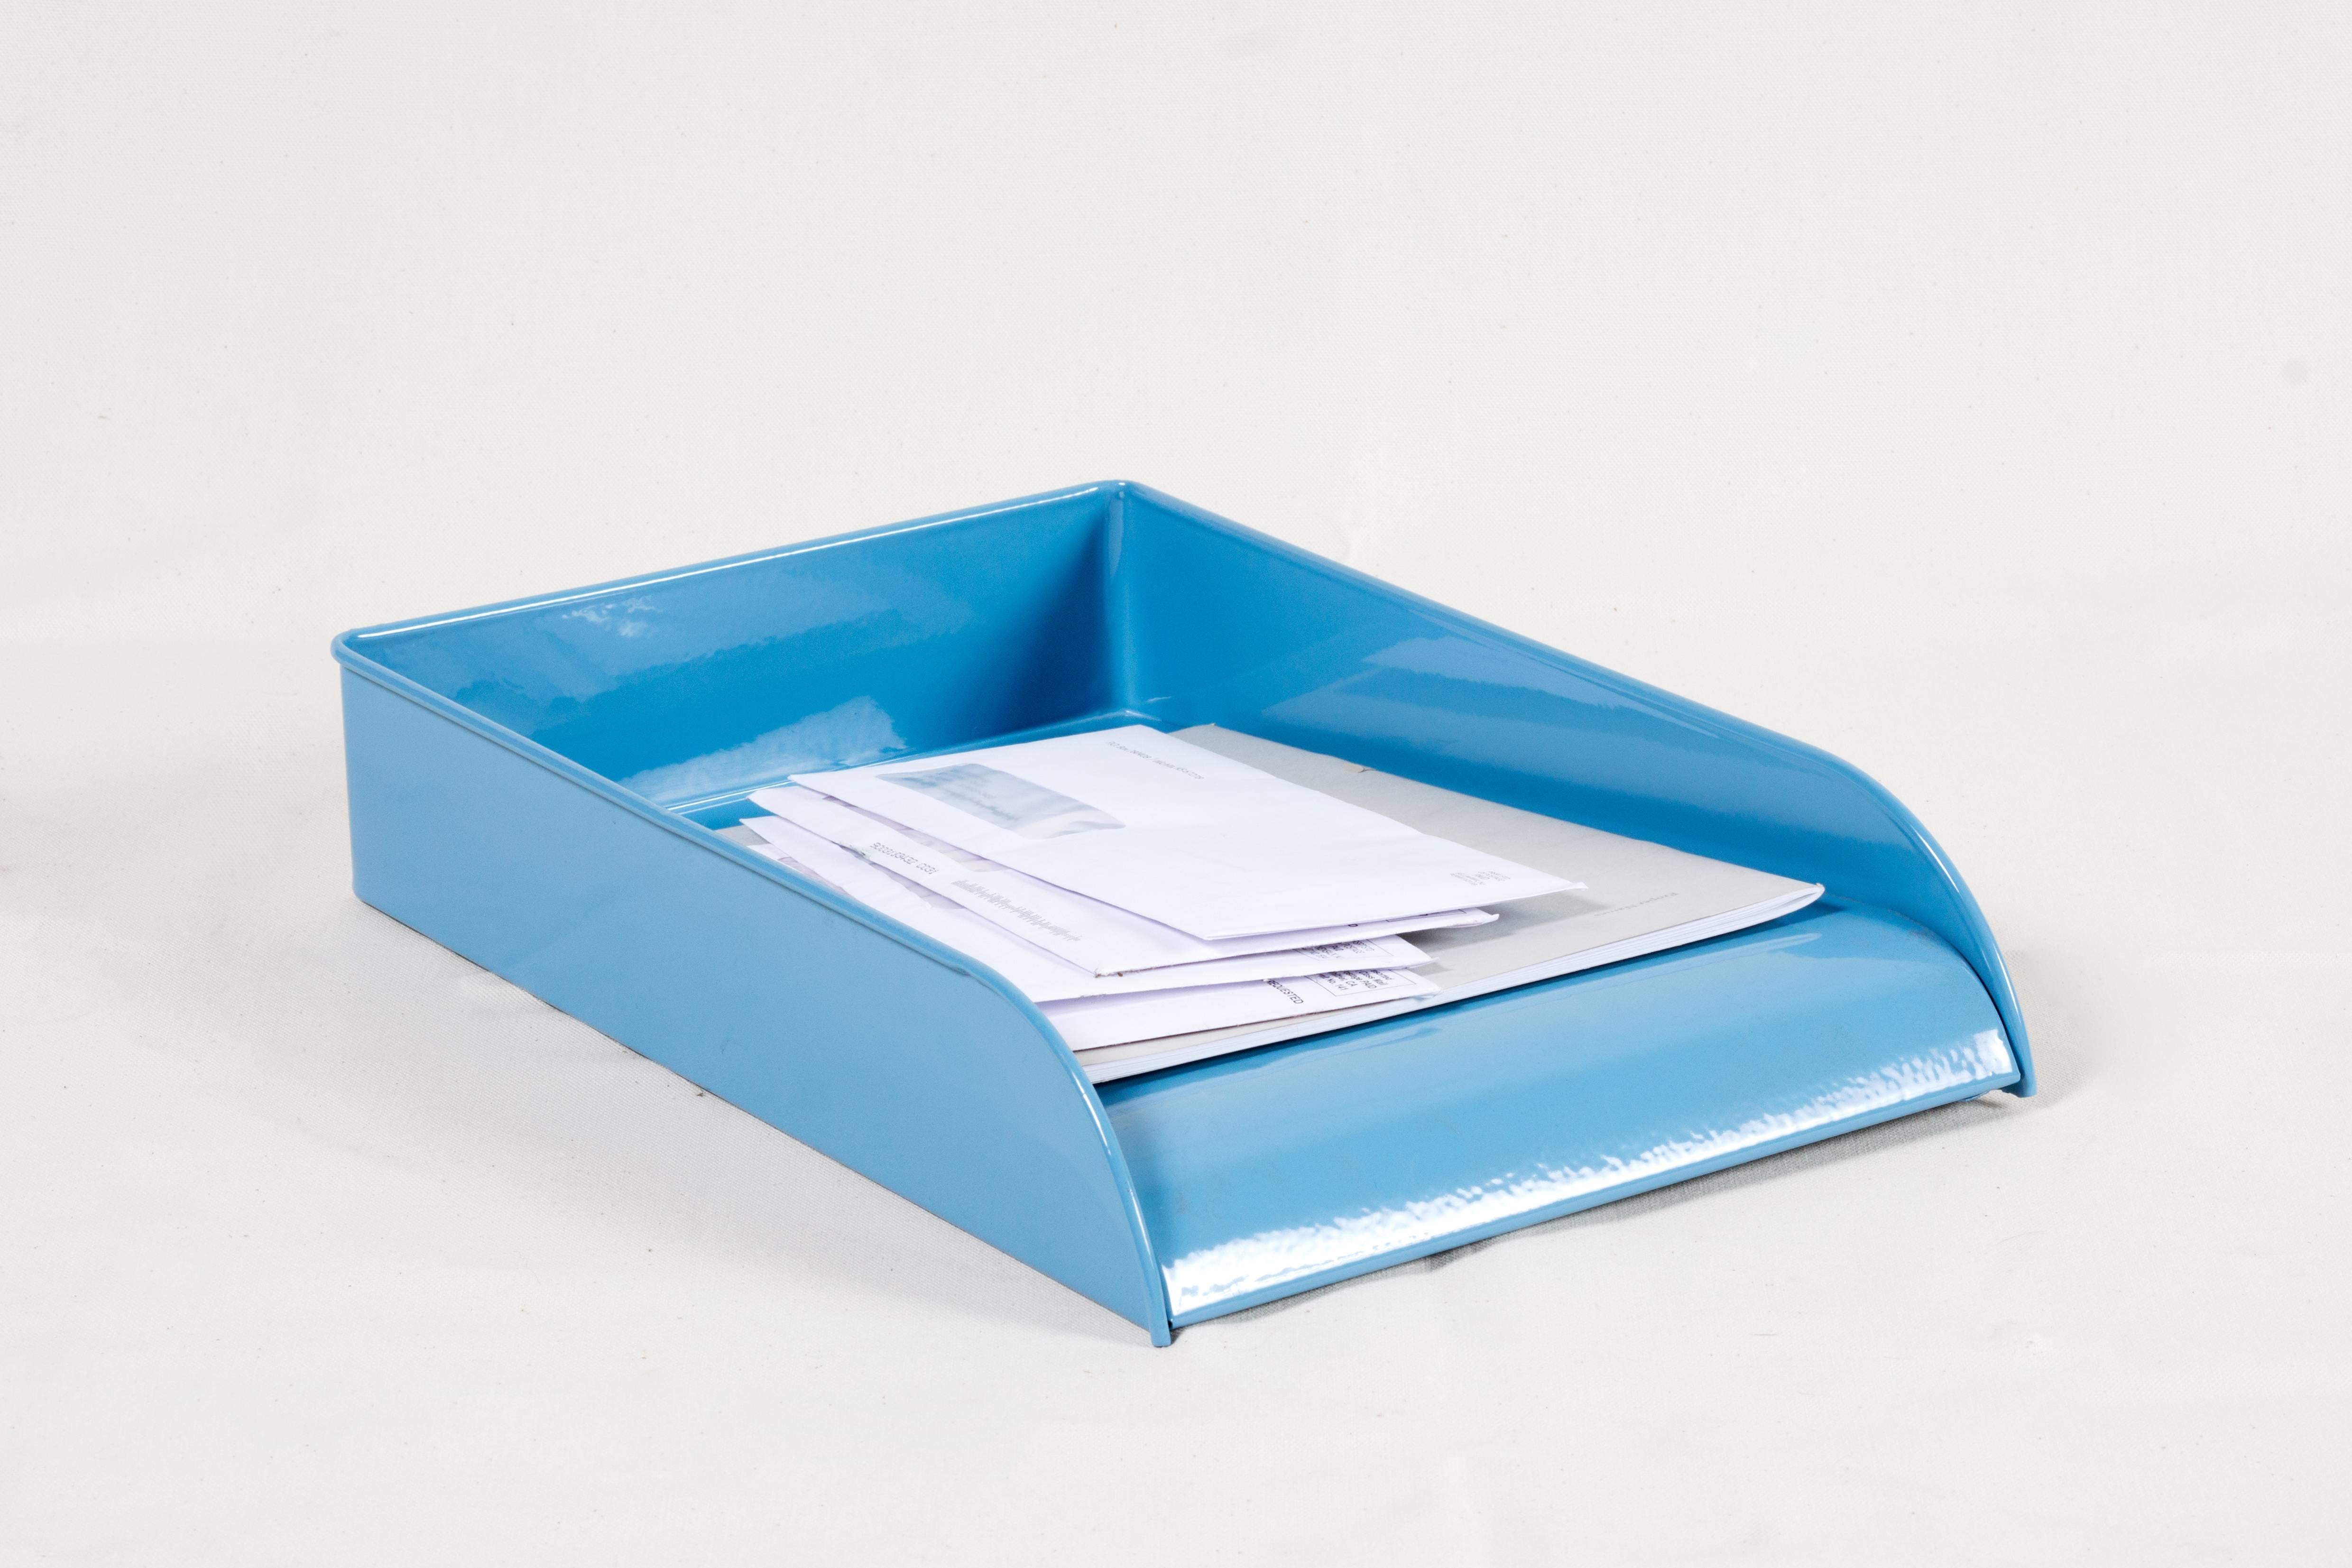 Vintage Art Deco office letter, memo or mail tray powder-coated in baby blue. This uniquely finished organizational piece is sure to keep your retro office in tip-top shape. Excellent refinished vintage condition. Gentle wear to steel as pictured.
